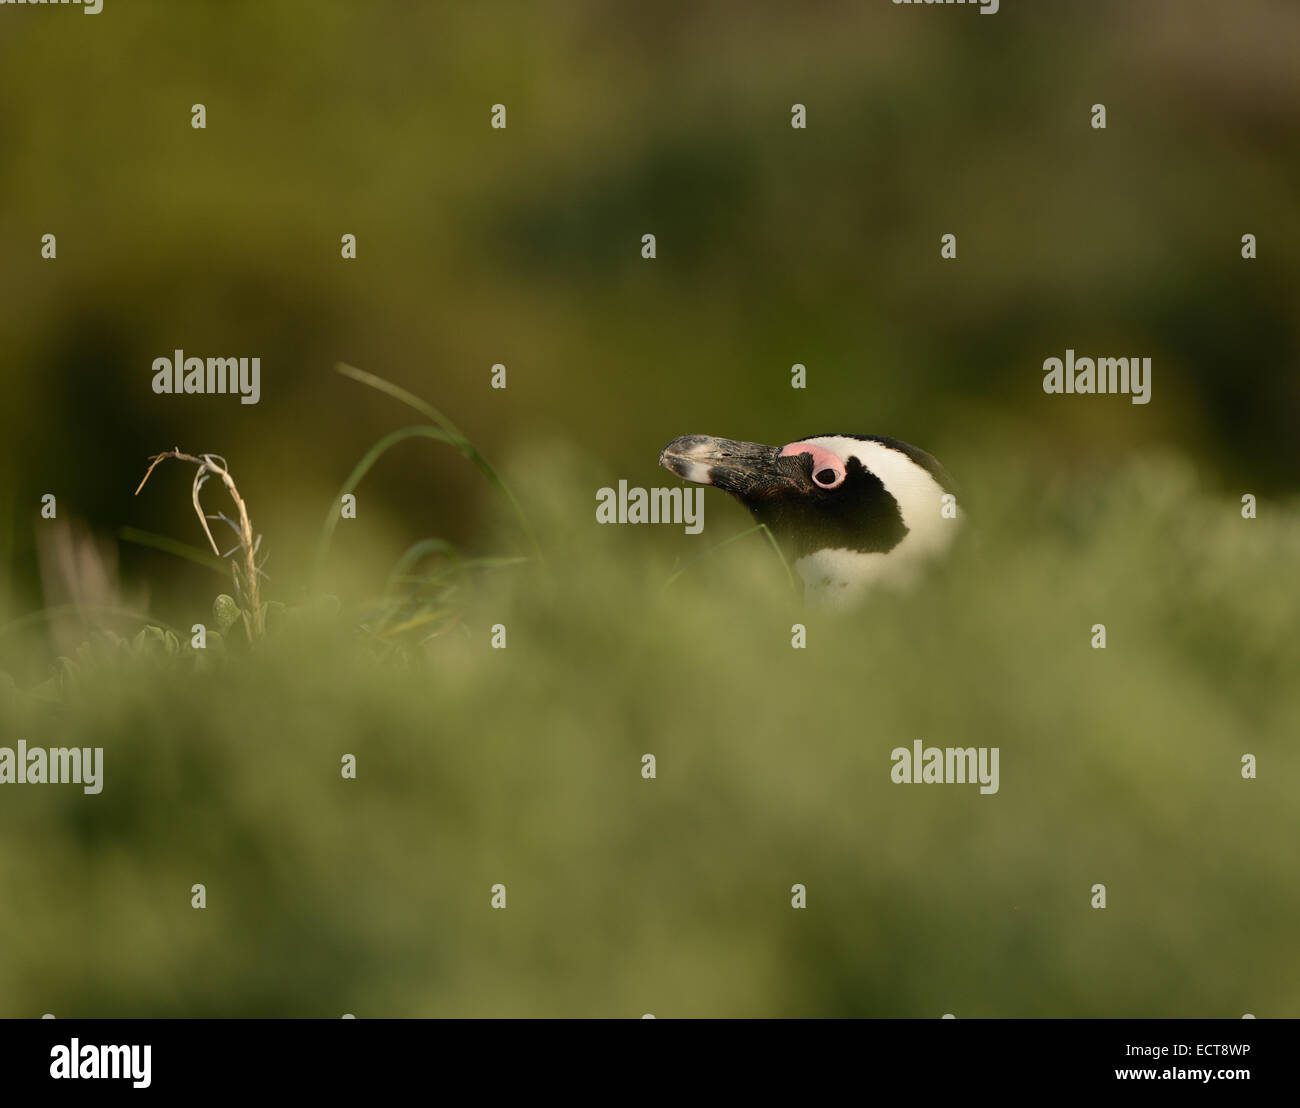 African Penguin (Spheniscus demersus) behind some bushes, at a beach near Cape Town in South Africa. Stock Photo